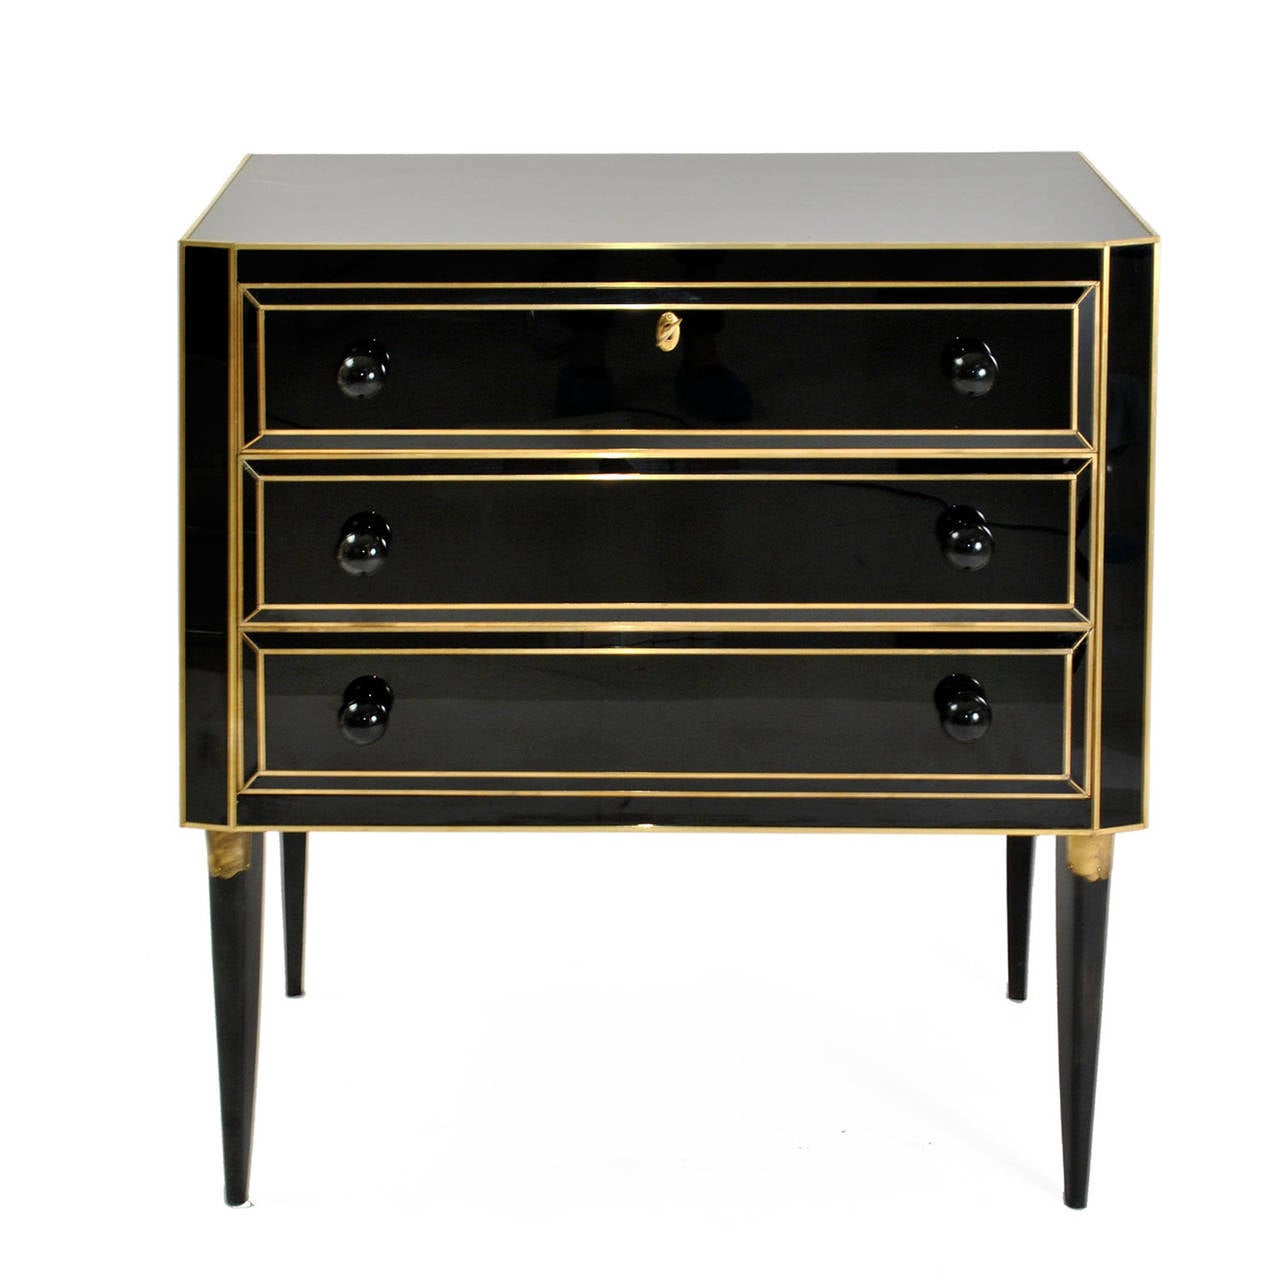 Pair of commodes composed by three drawers, made in solid wood covered in black Murano glass  with details in bronze and brass.